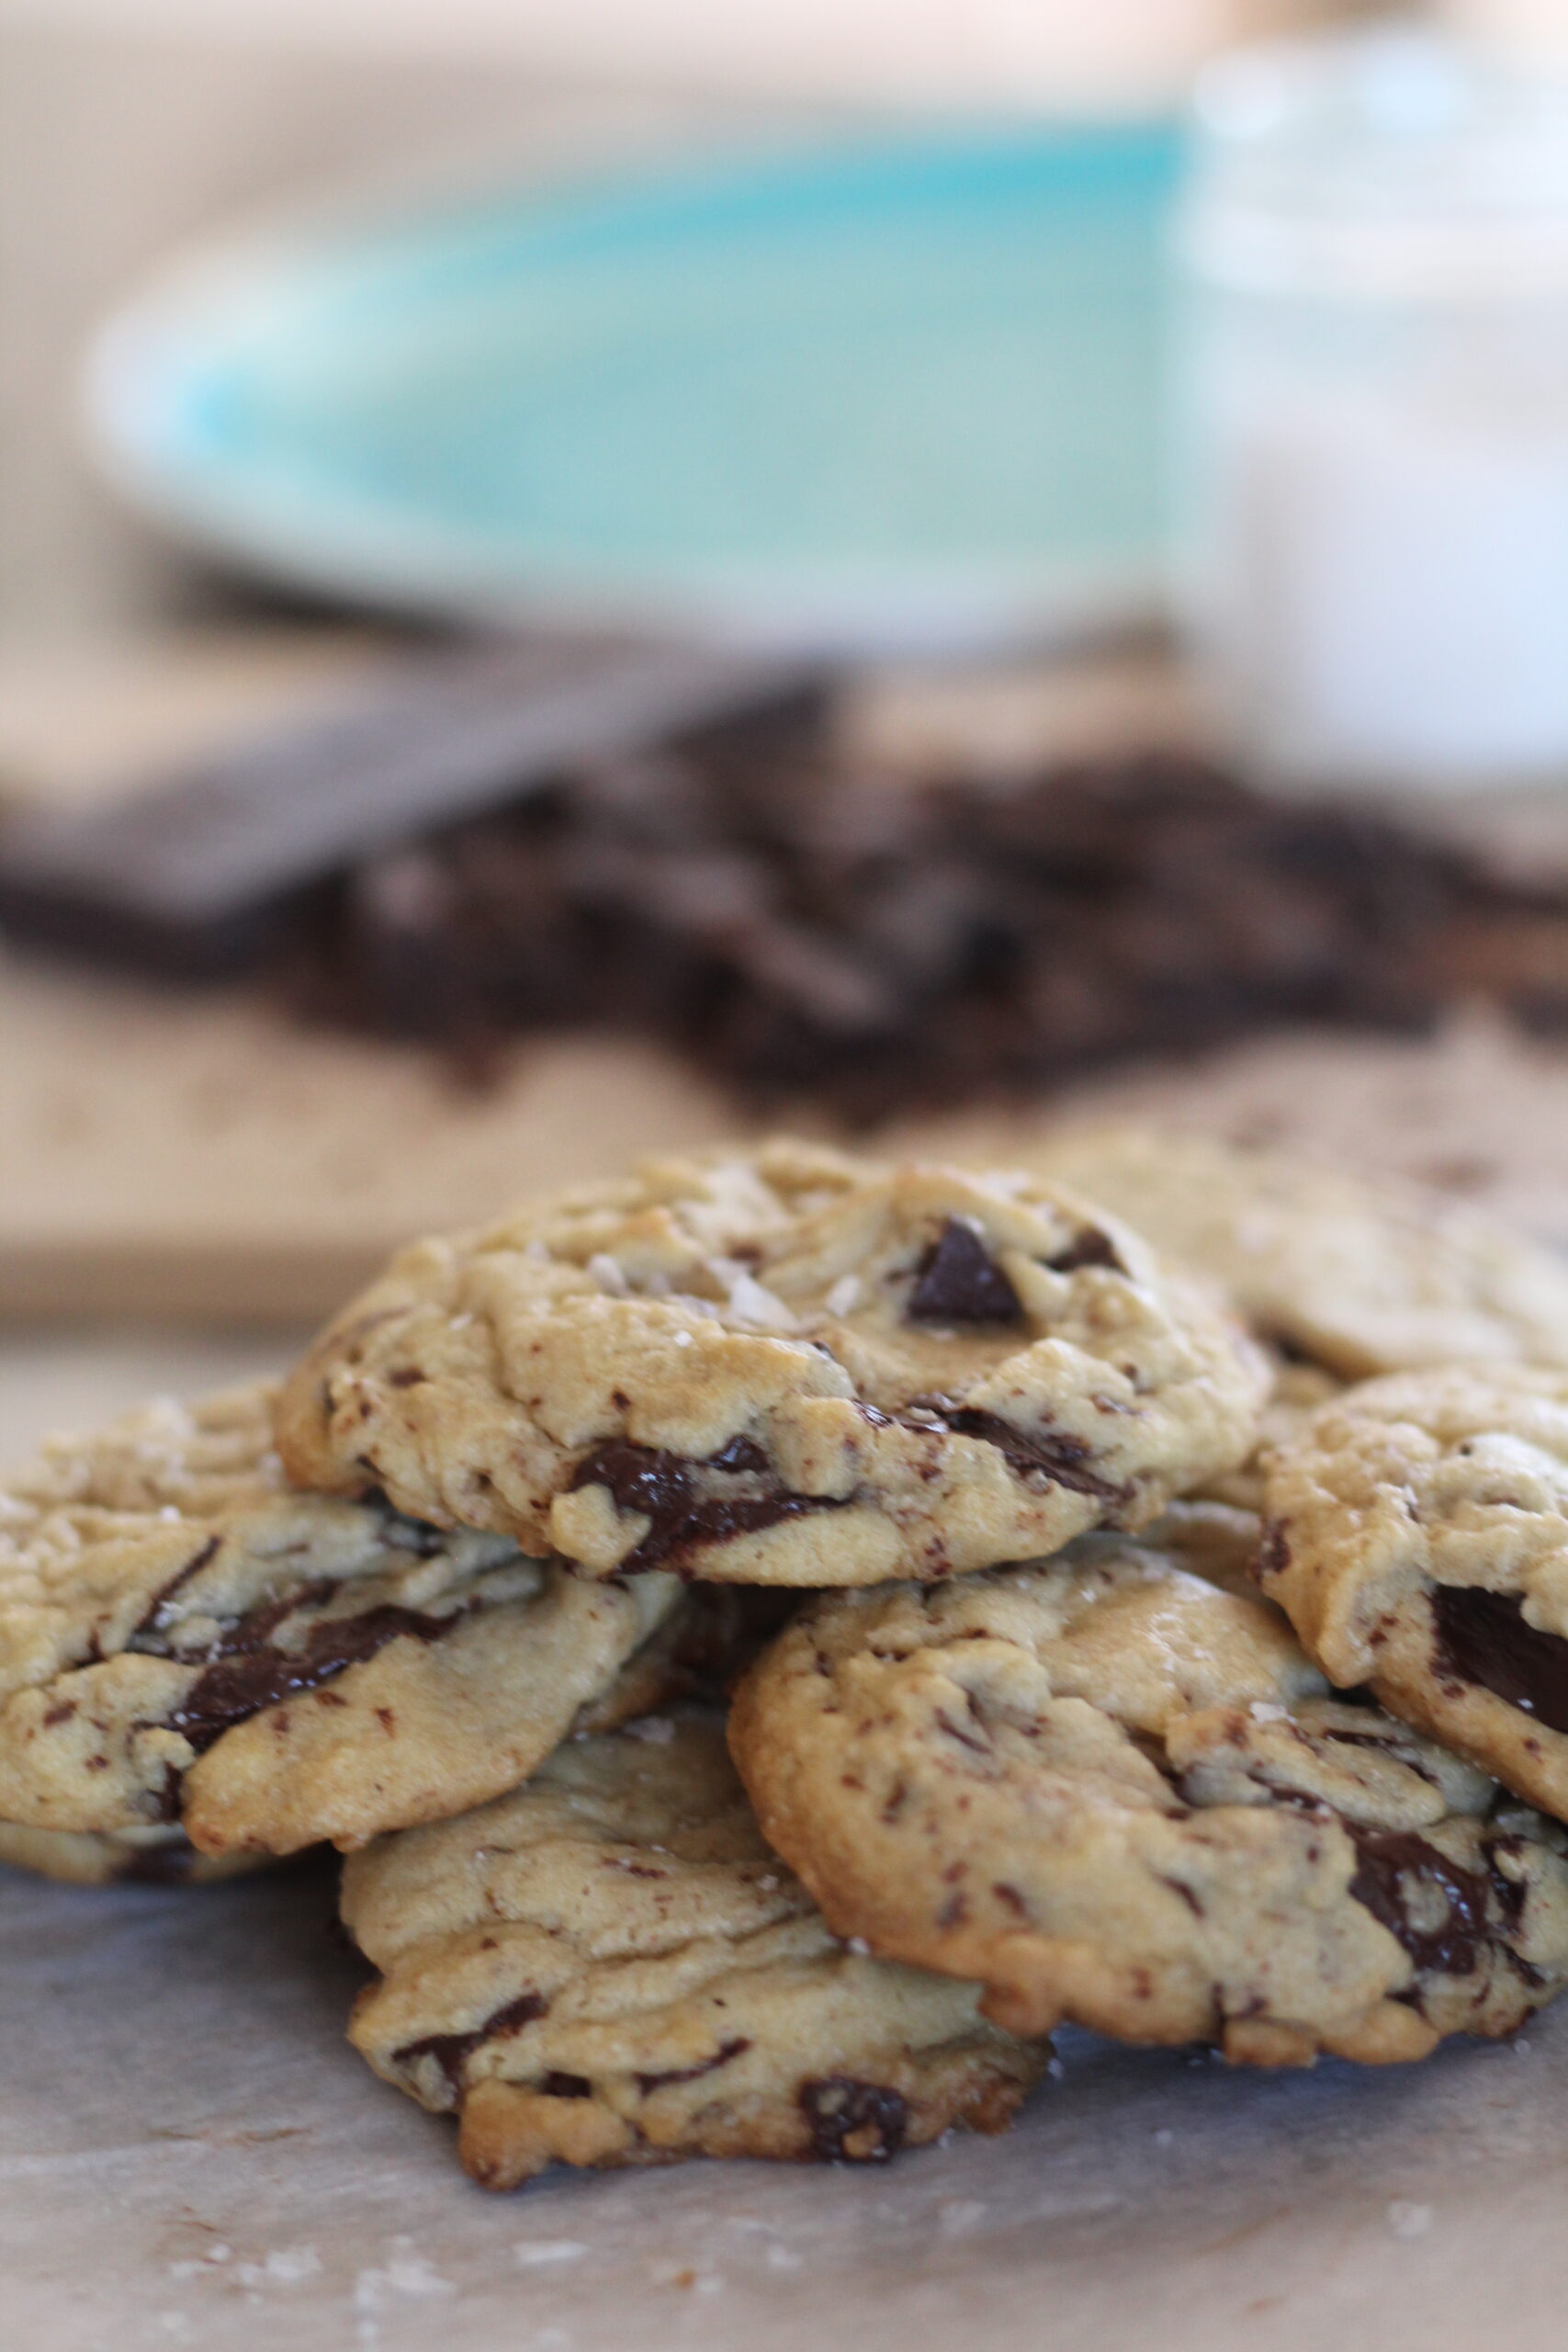 Must Try these chocolate chip cookies